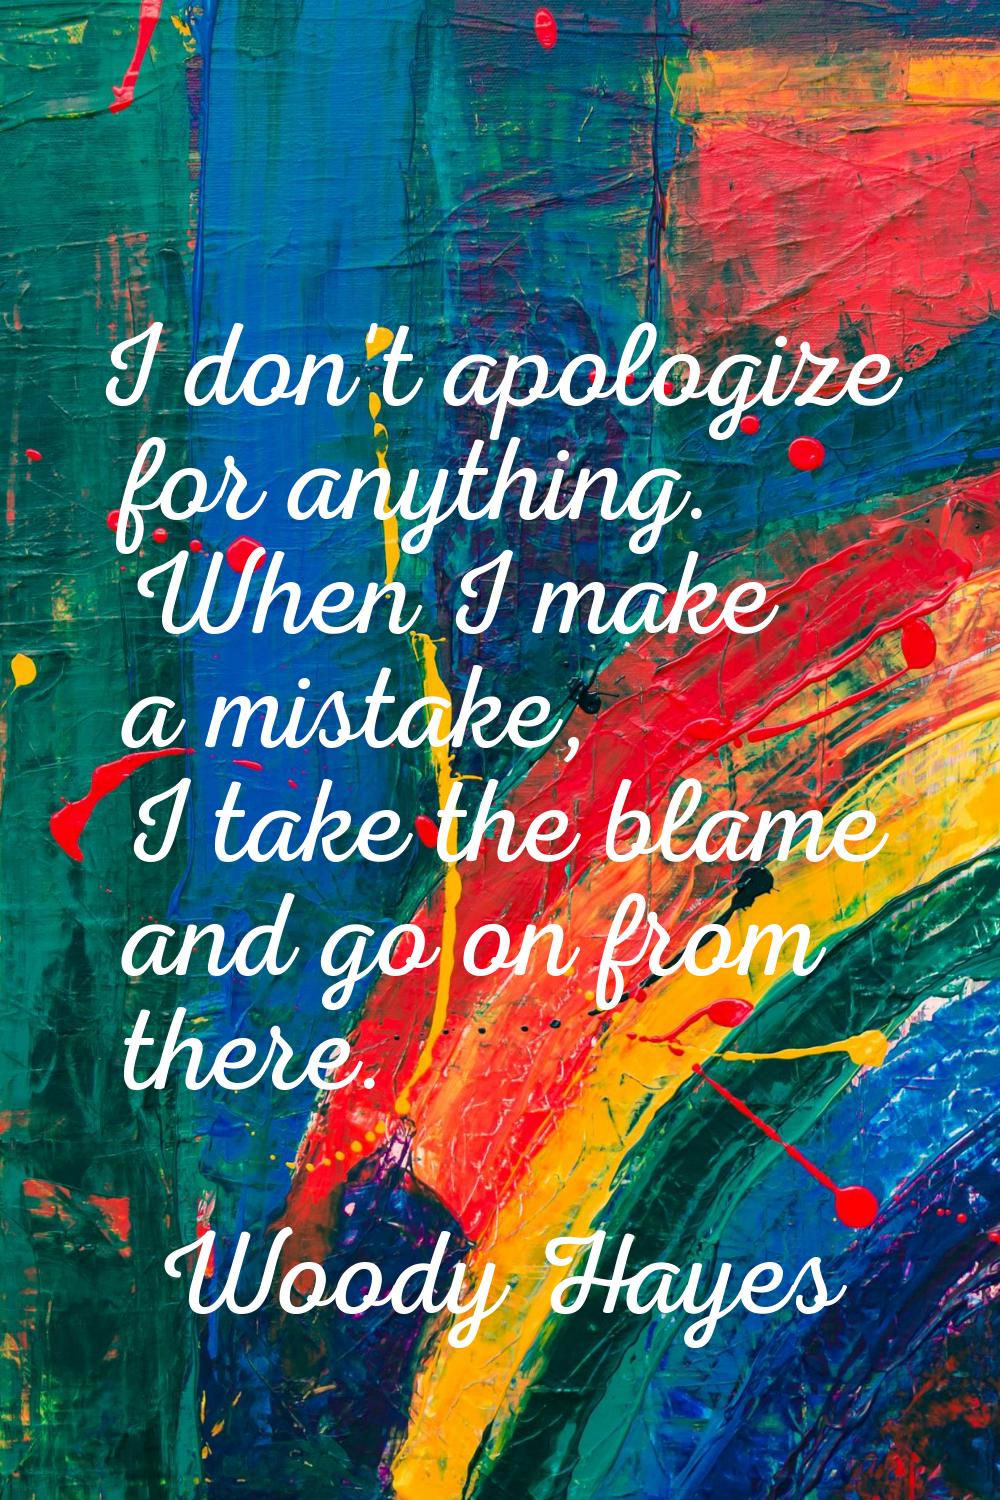 I don't apologize for anything. When I make a mistake, I take the blame and go on from there.